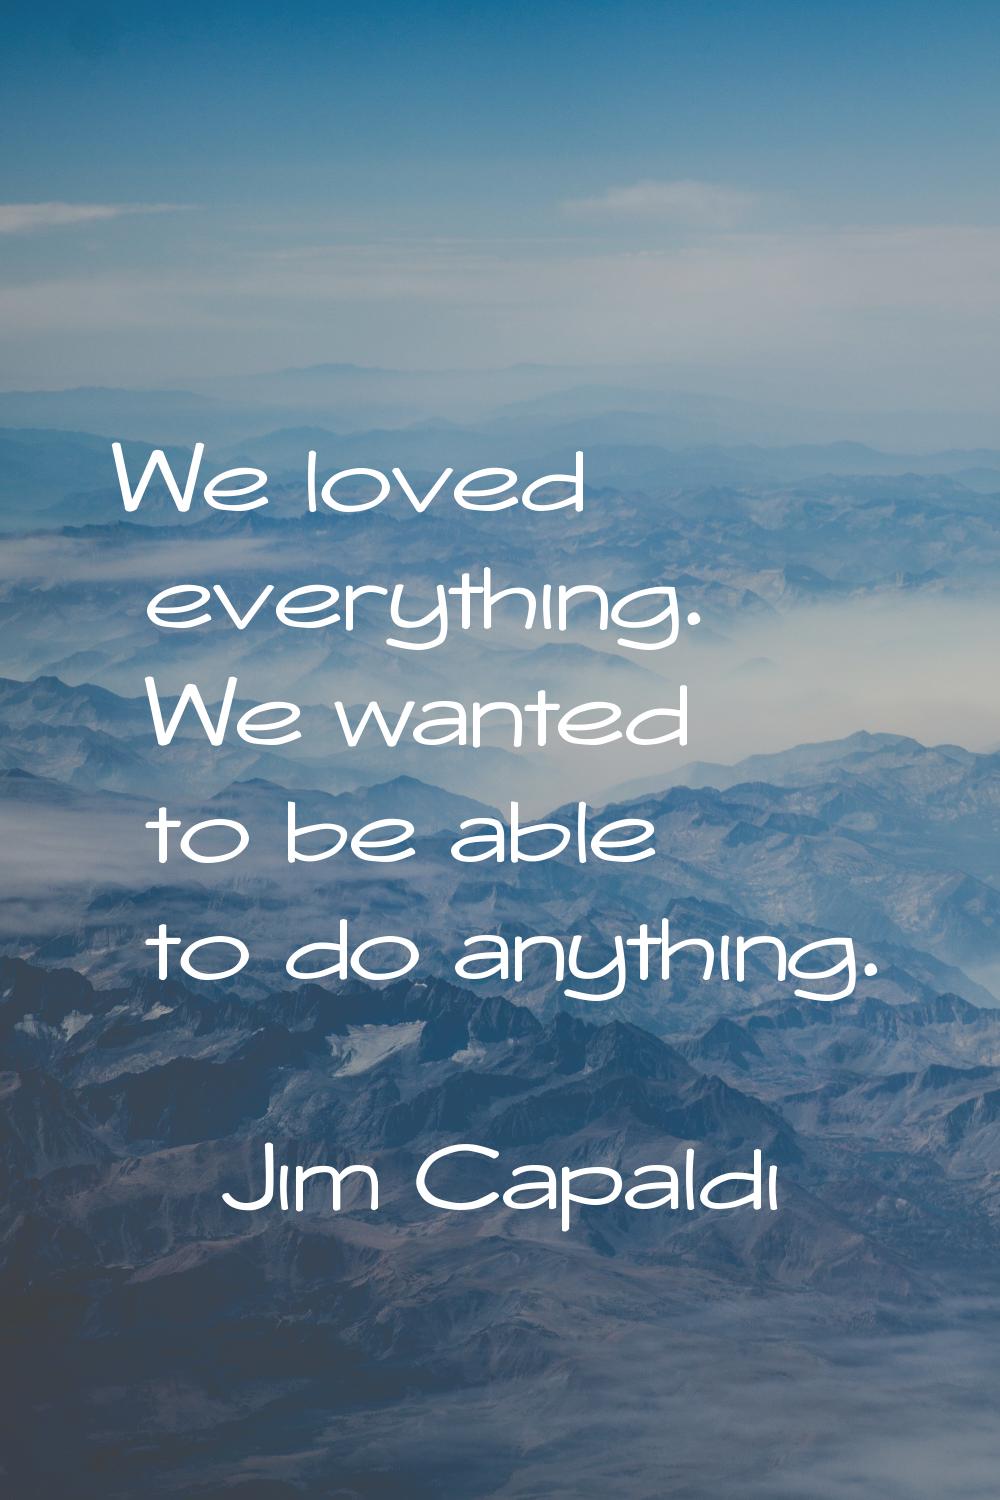 We loved everything. We wanted to be able to do anything.